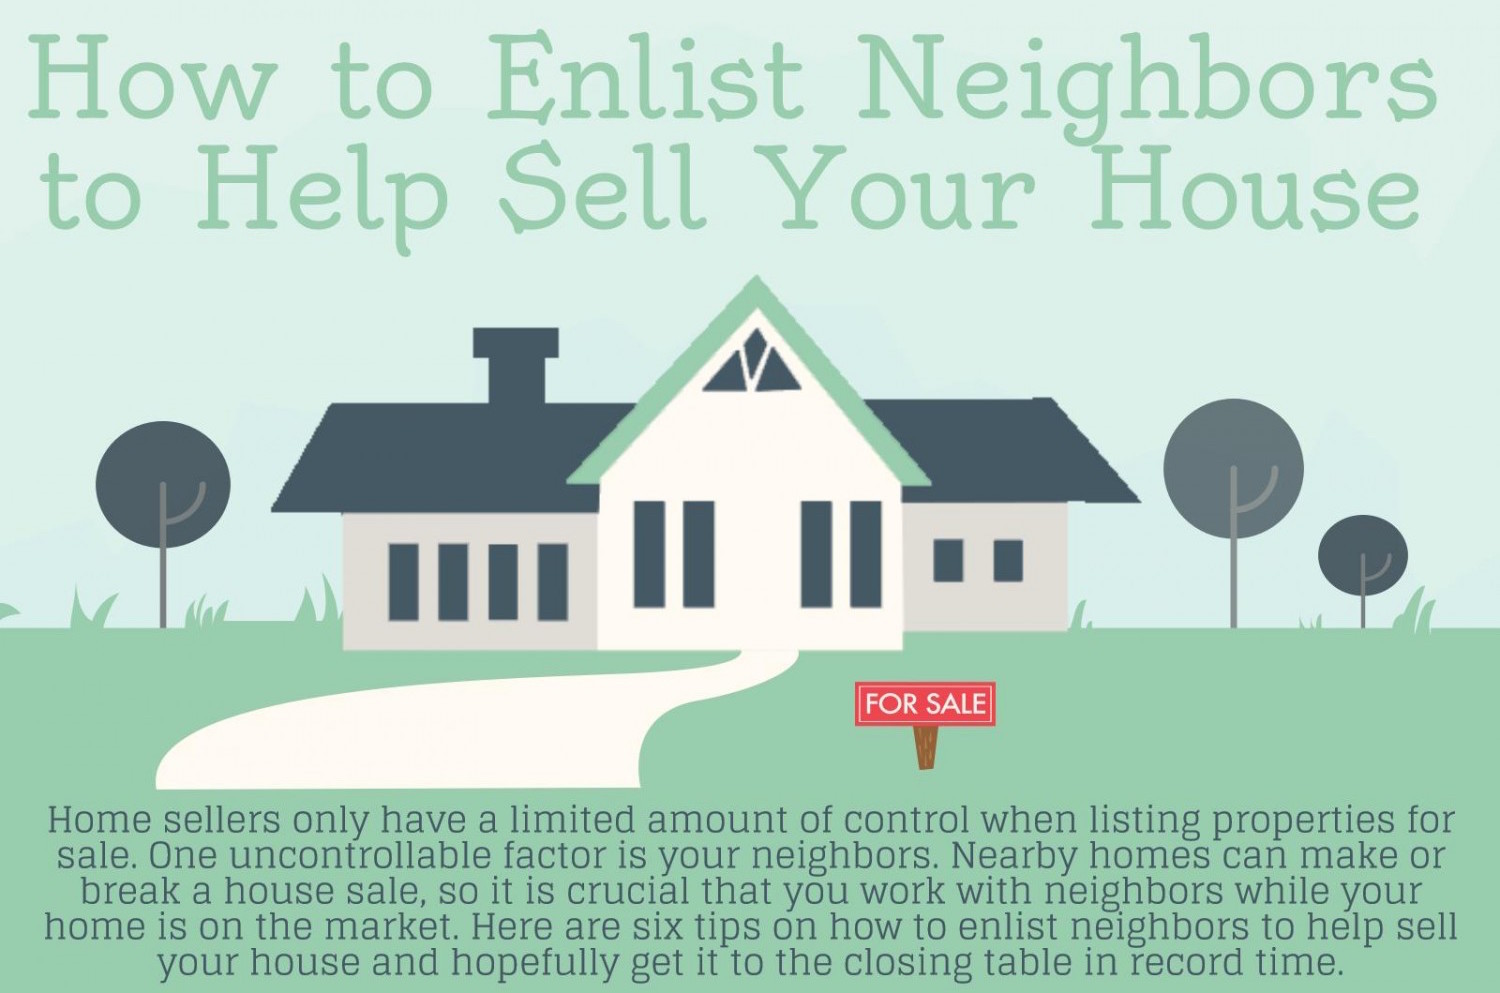 Have Your Neighbors Help Sell Your Home!